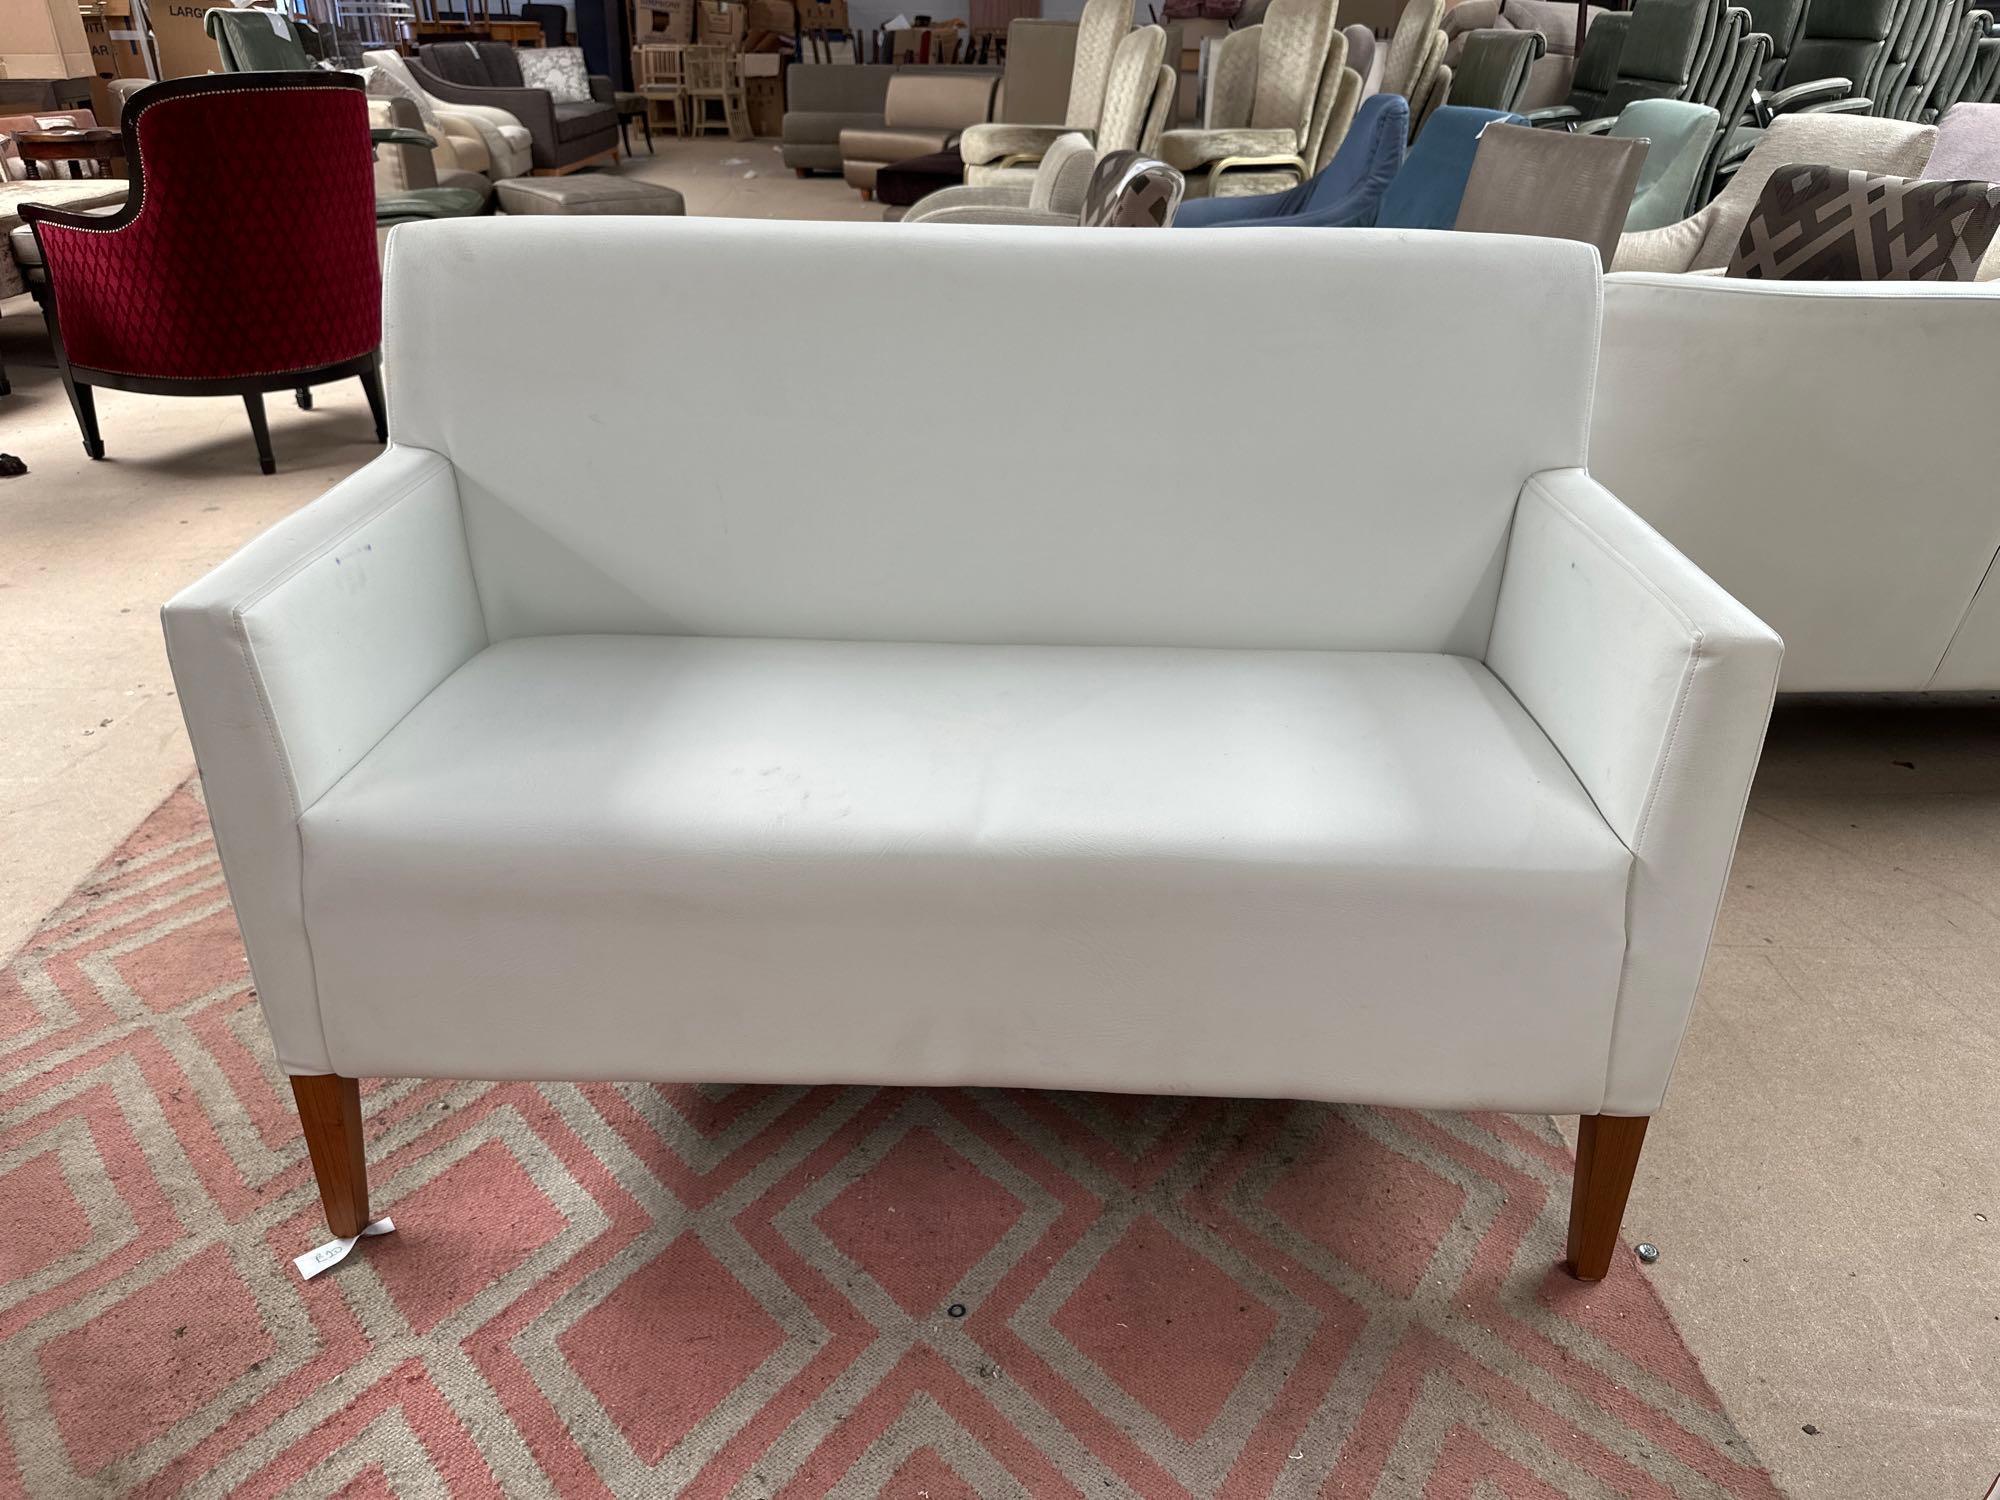 C. S. Contract Furniture Of Shropshire Upholstered White Leather Two Seater Sofa On Wooden Legs